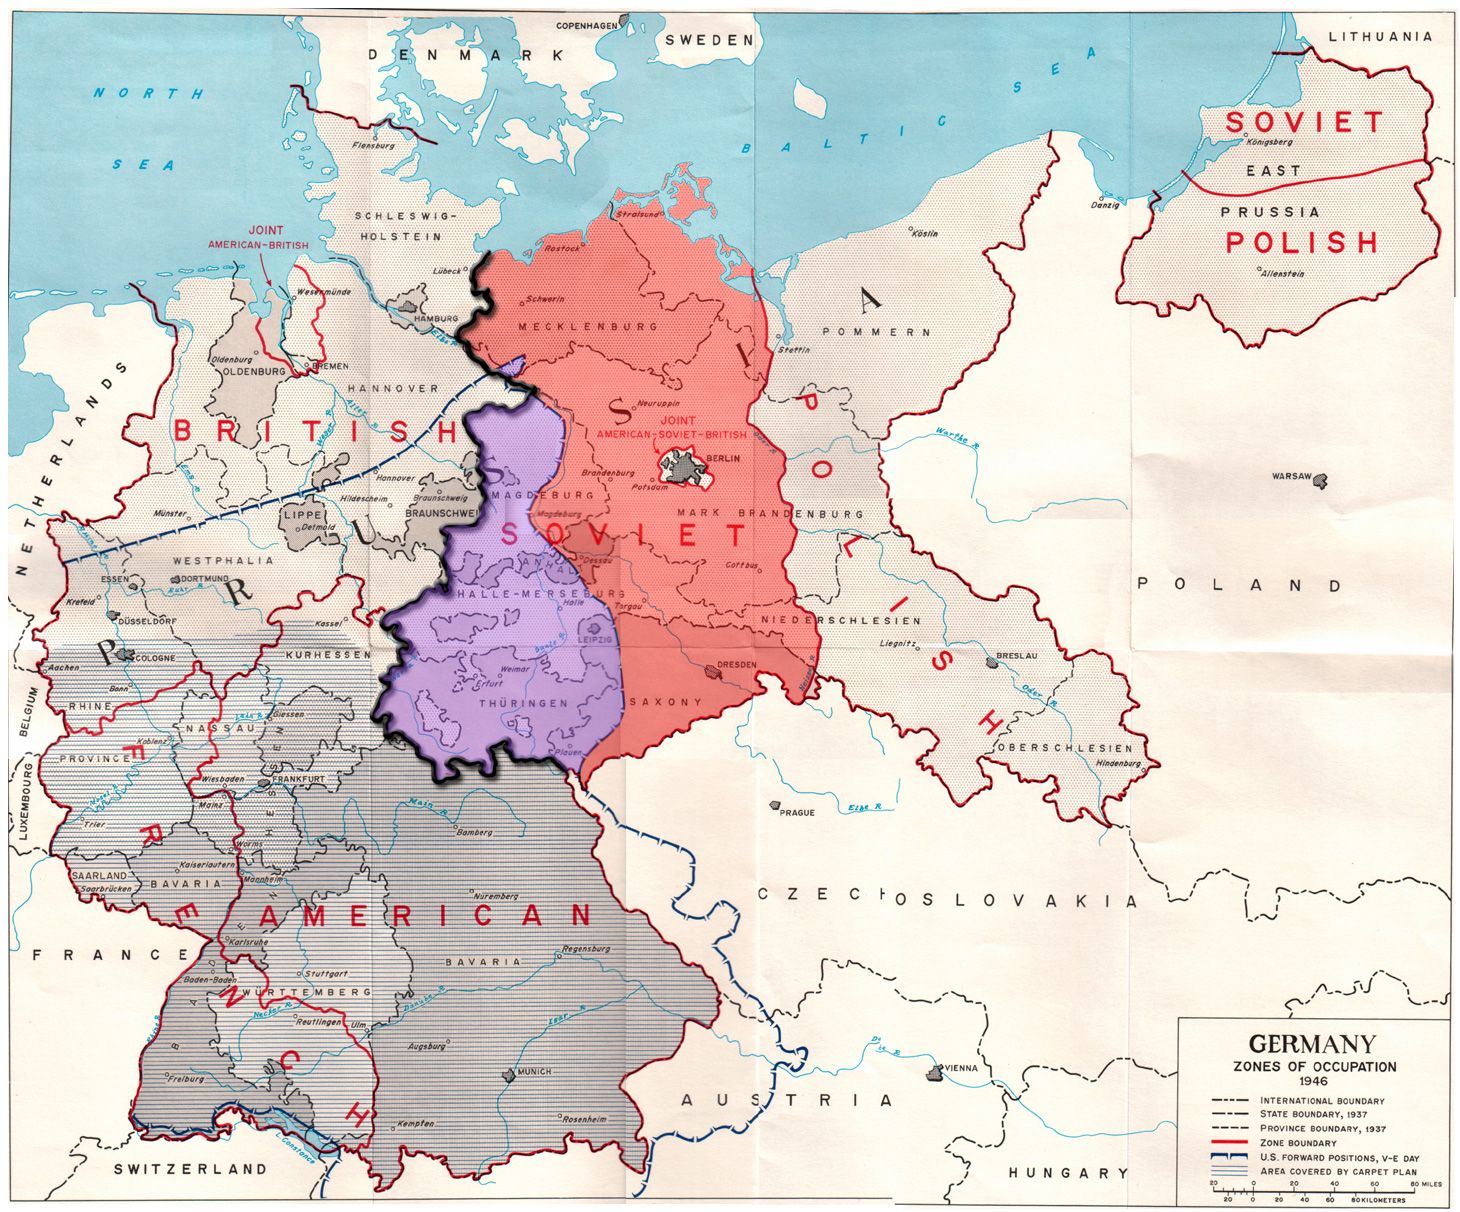 Germany_occupation_zones_with_border.jpg